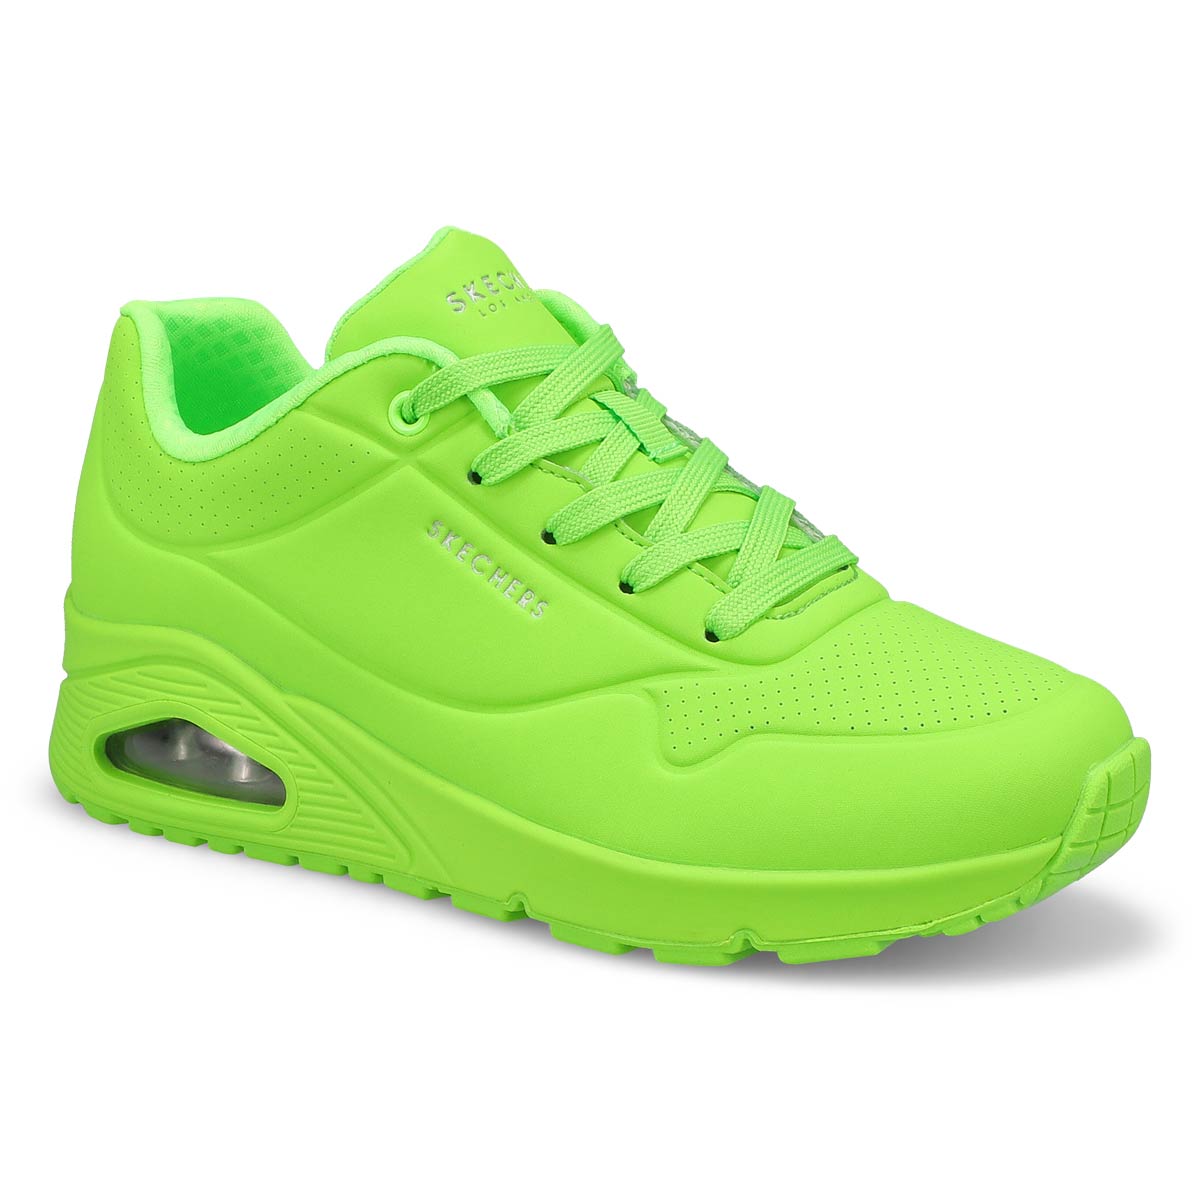 Women's Uno Night Shades Lace Up Sneaker - Lime Gr